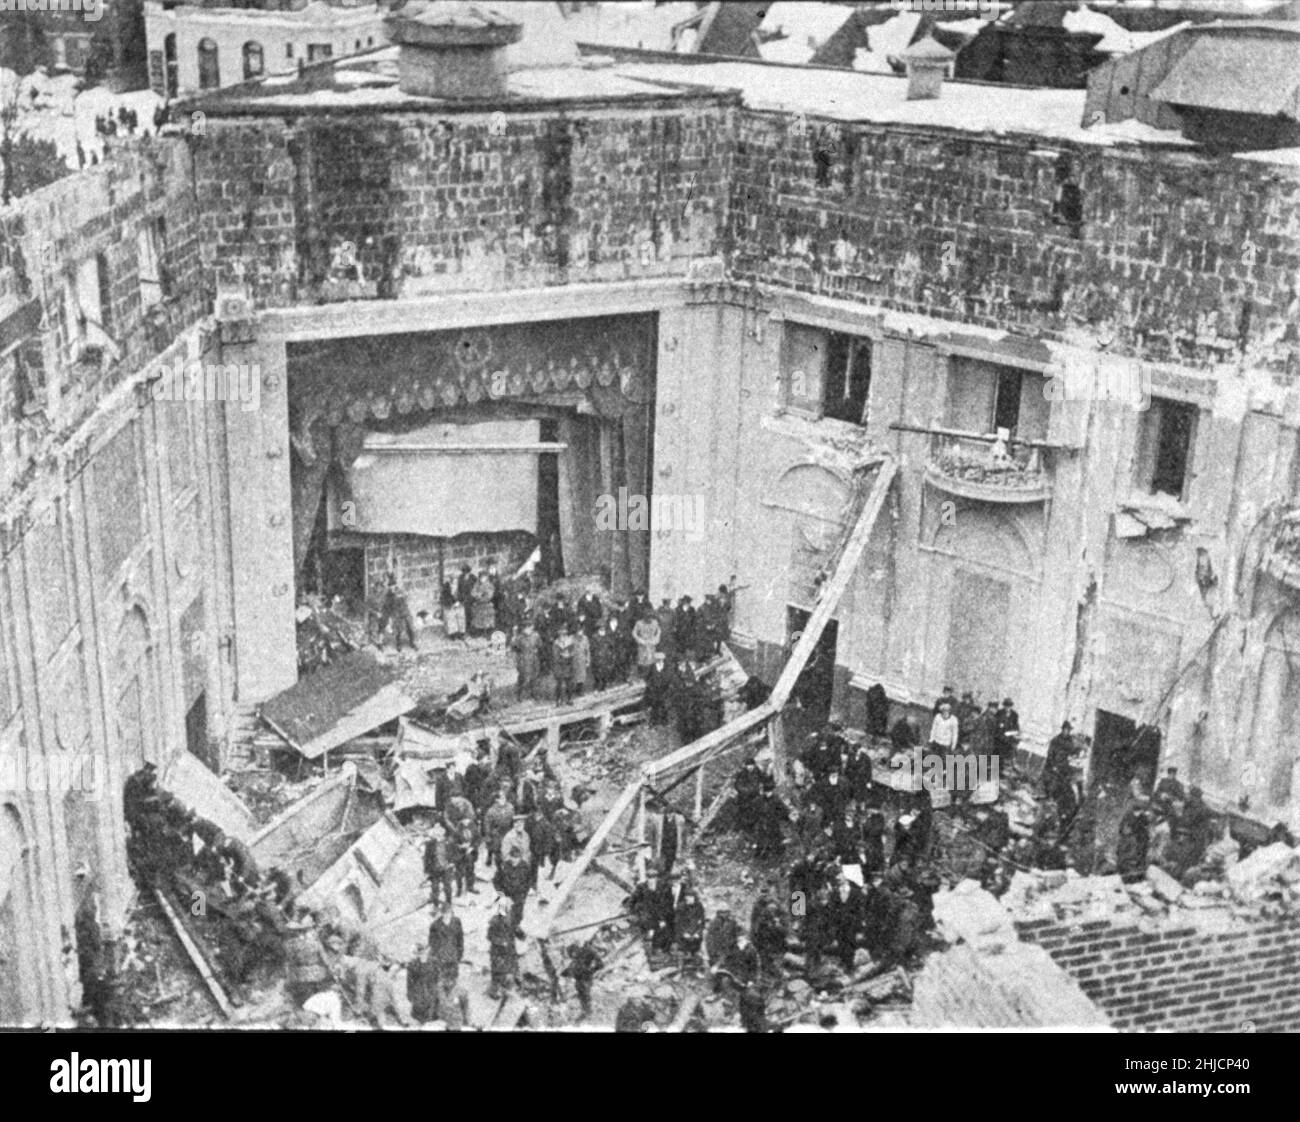 View of the interior of the Knickerbocker Theater after the last body had been removed. 96 were killed and 125 injured in the collapse of the theater. One other man froze to death in the storm. Washington, D. C. January 27, 28, 1922. Stock Photo